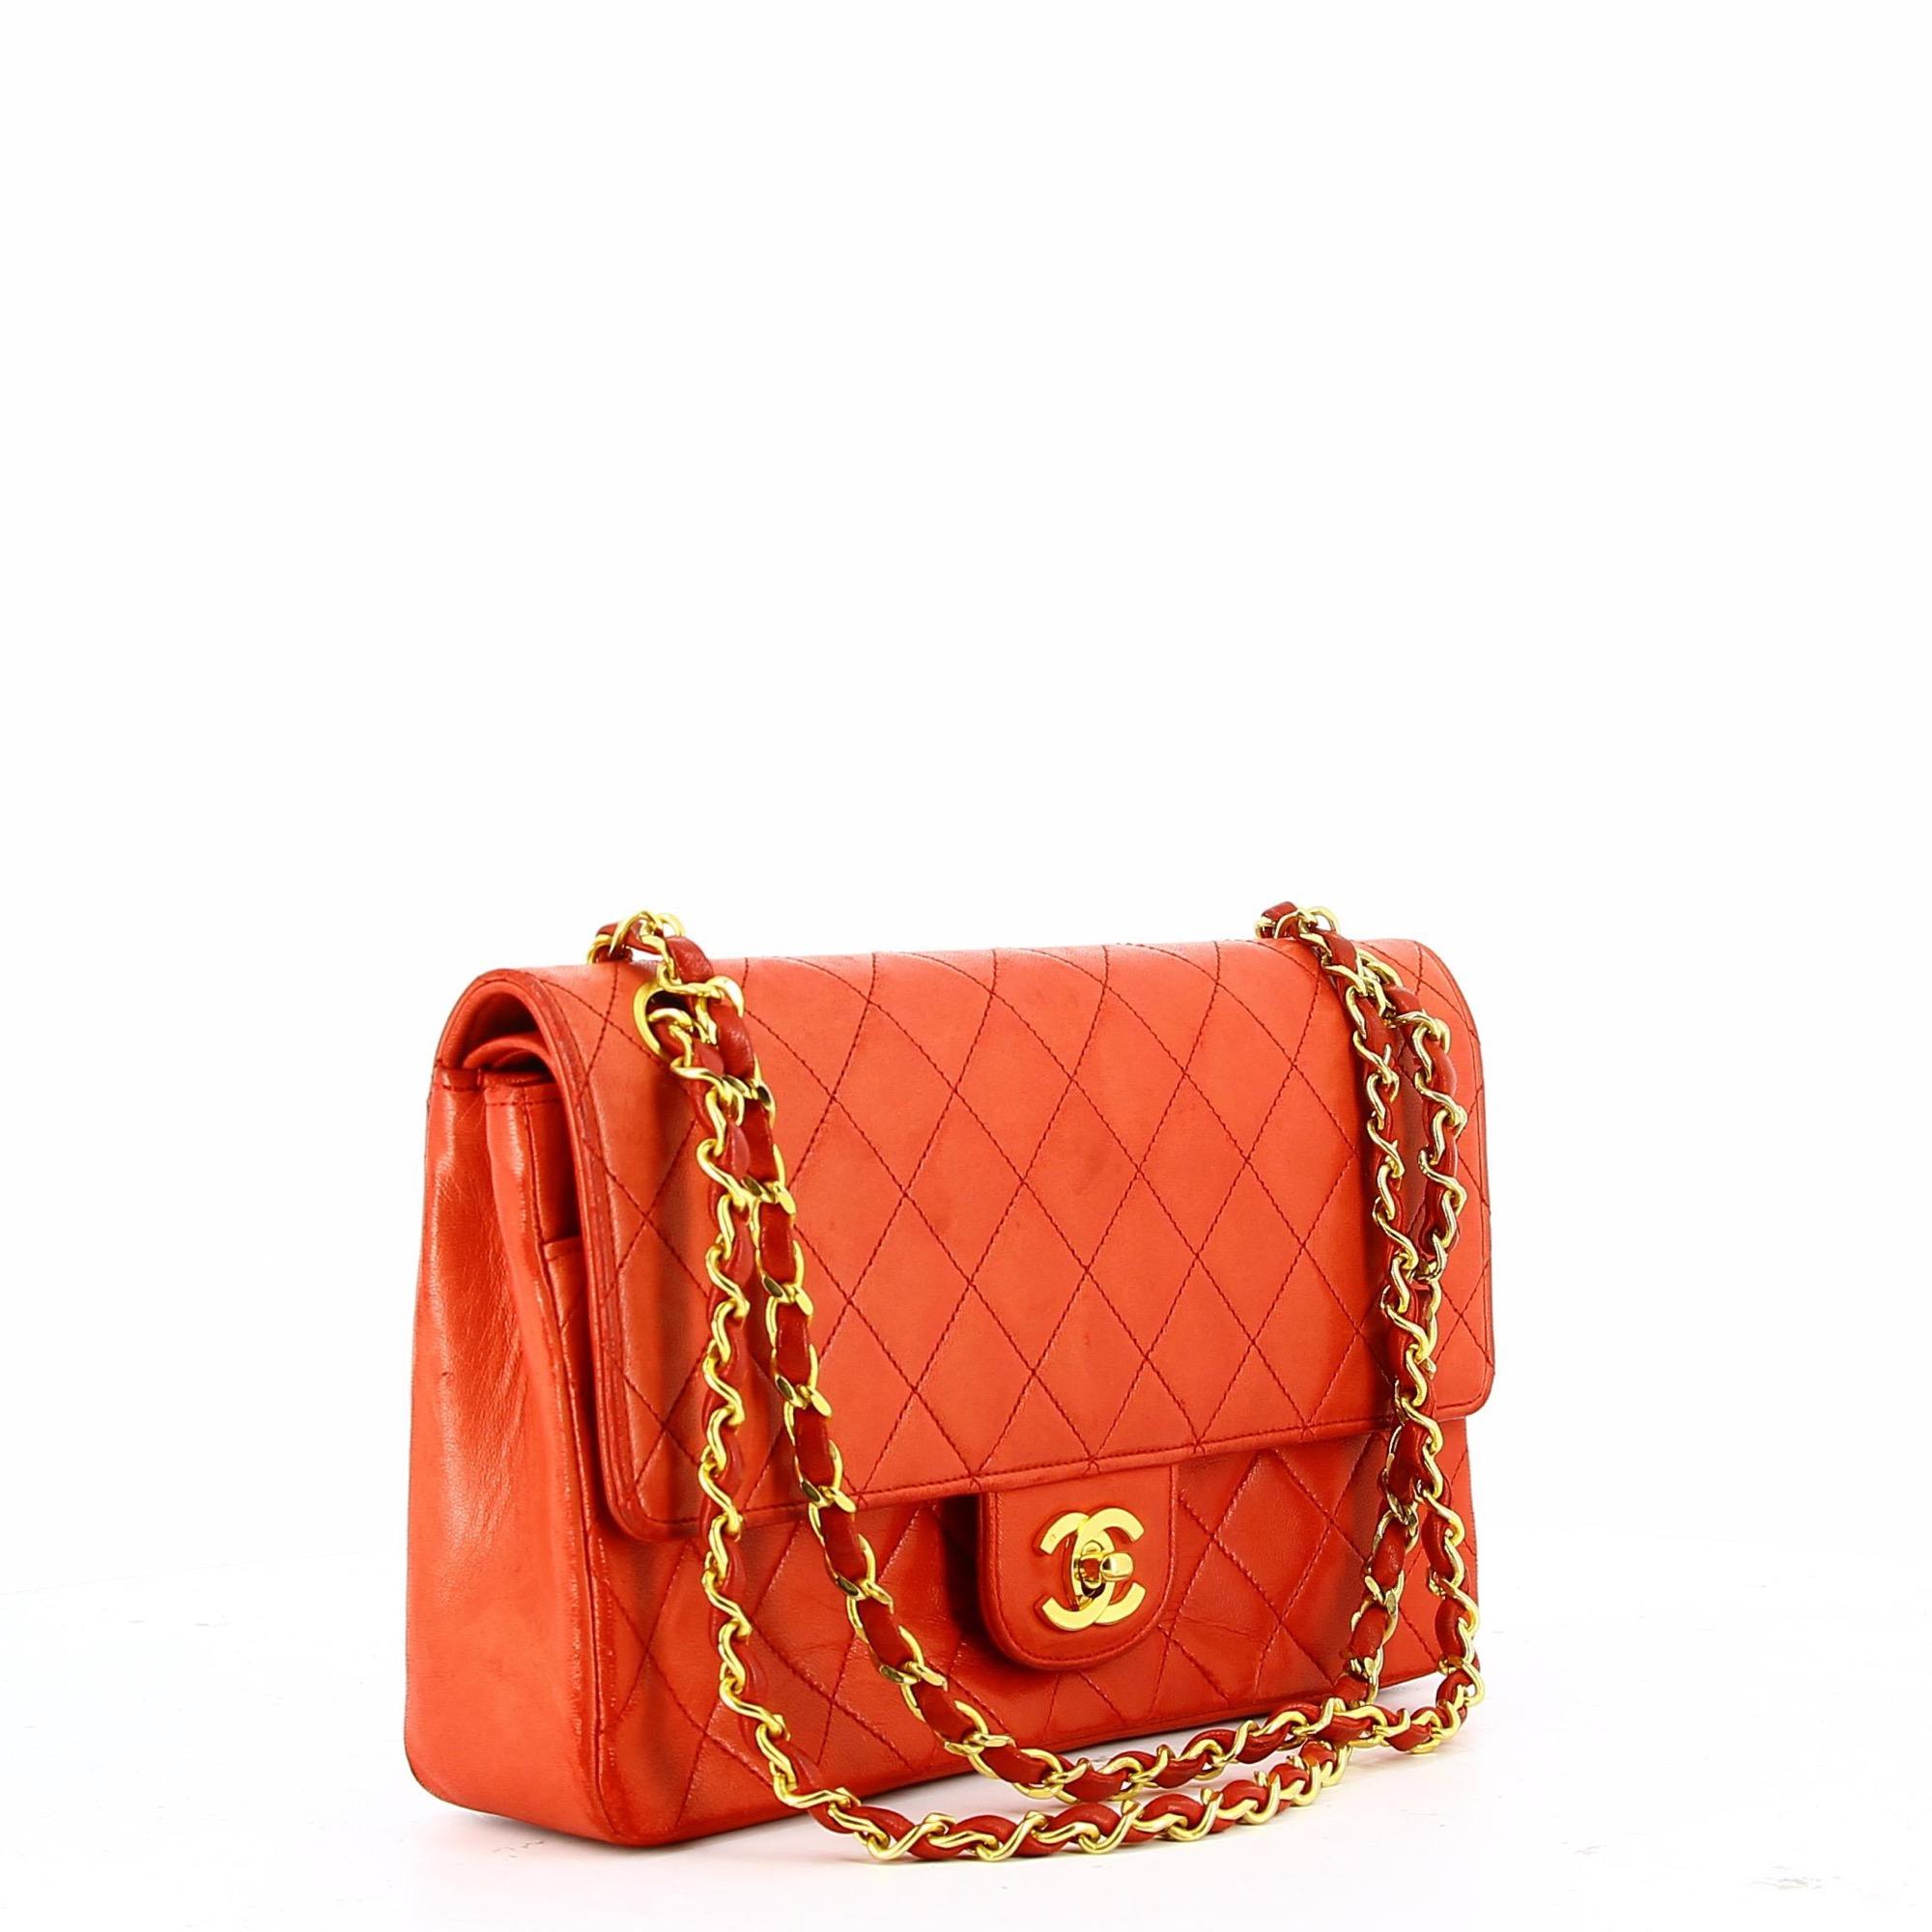 Chanel Red Timeless Bag.
Good condition show some signs of use and wear and some discoloration 